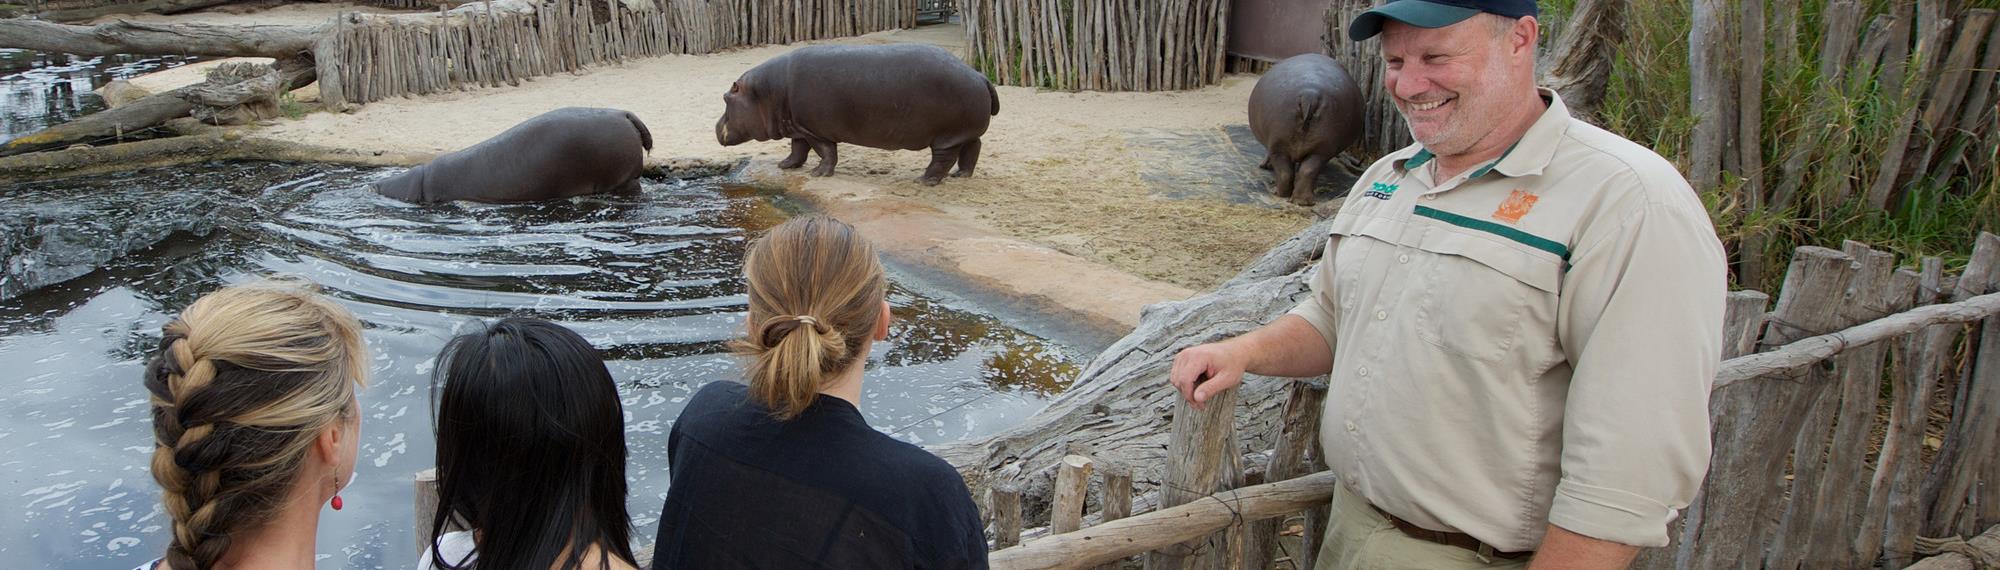 Staff member Davin giving the Hippo Presentation talk to three young visitors next to the hippo pond. Three hippopotamus are walking into the pond on the other side of the wooden fence.